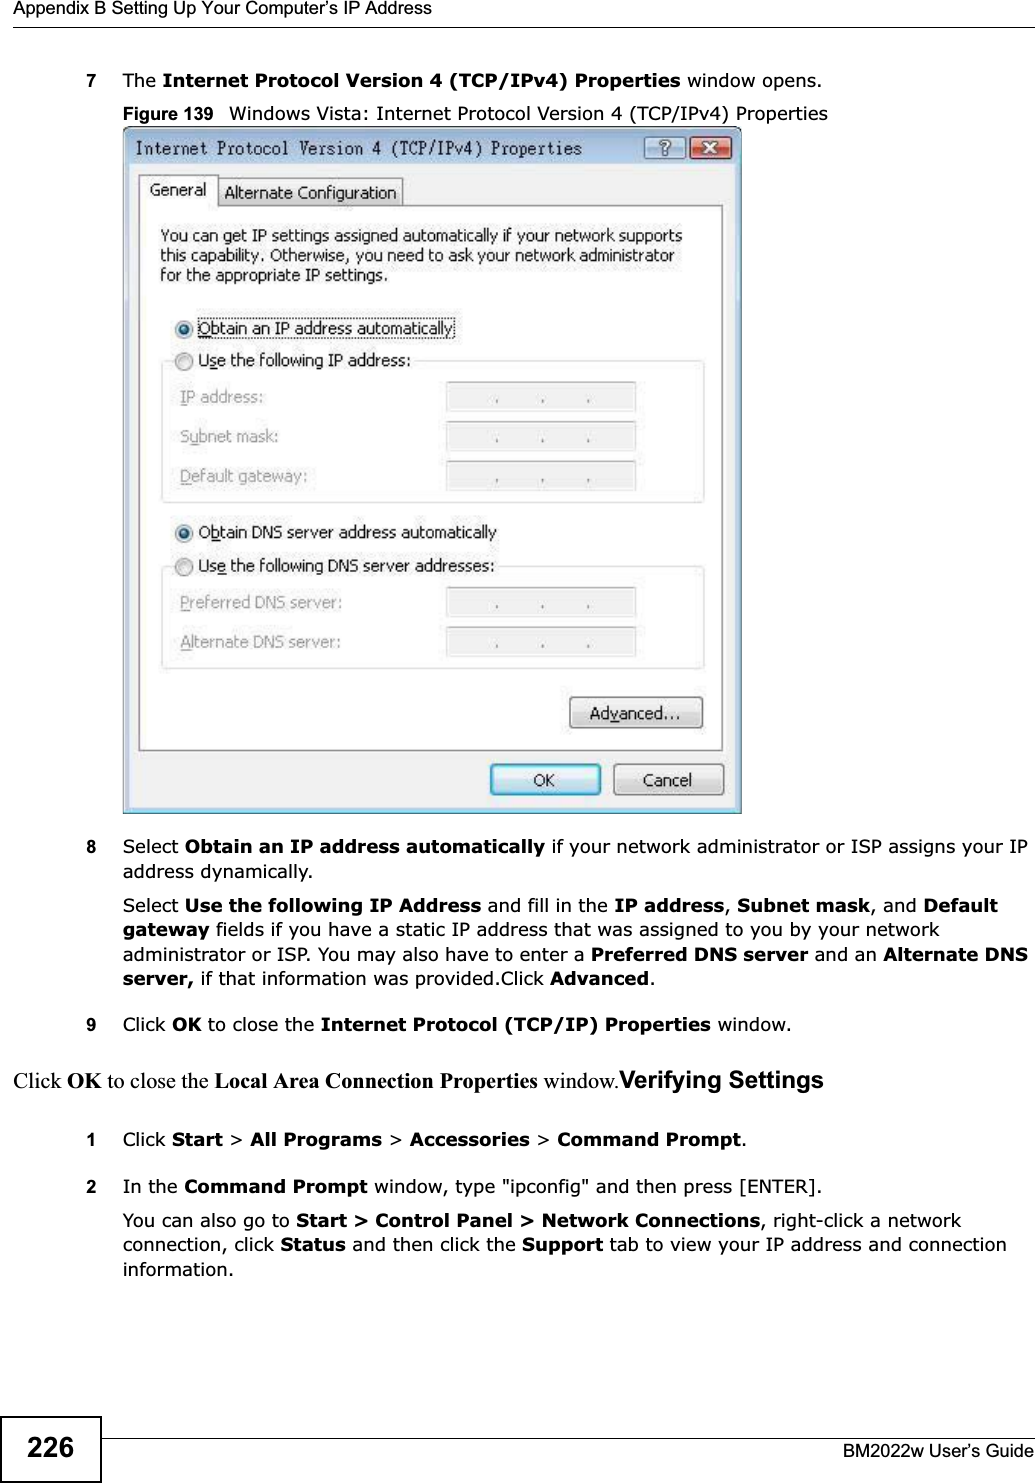 Appendix B Setting Up Your Computer’s IP AddressBM2022w User’s Guide2267The Internet Protocol Version 4 (TCP/IPv4) Properties window opens.Figure 139   Windows Vista: Internet Protocol Version 4 (TCP/IPv4) Properties8Select Obtain an IP address automatically if your network administrator or ISP assigns your IP address dynamically.Select Use the following IP Address and fill in the IP address,Subnet mask, and Default gateway fields if you have a static IP address that was assigned to you by your network administrator or ISP. You may also have to enter a Preferred DNS server and an Alternate DNSserver, if that information was provided.Click Advanced.9Click OK to close the Internet Protocol (TCP/IP) Properties window.Click OK to close the Local Area Connection Properties window.Verifying Settings1Click Start &gt; All Programs &gt; Accessories &gt; Command Prompt.2In the Command Prompt window, type &quot;ipconfig&quot; and then press [ENTER]. You can also go to Start &gt; Control Panel &gt; Network Connections, right-click a network connection, click Status and then click the Support tab to view your IP address and connection information.